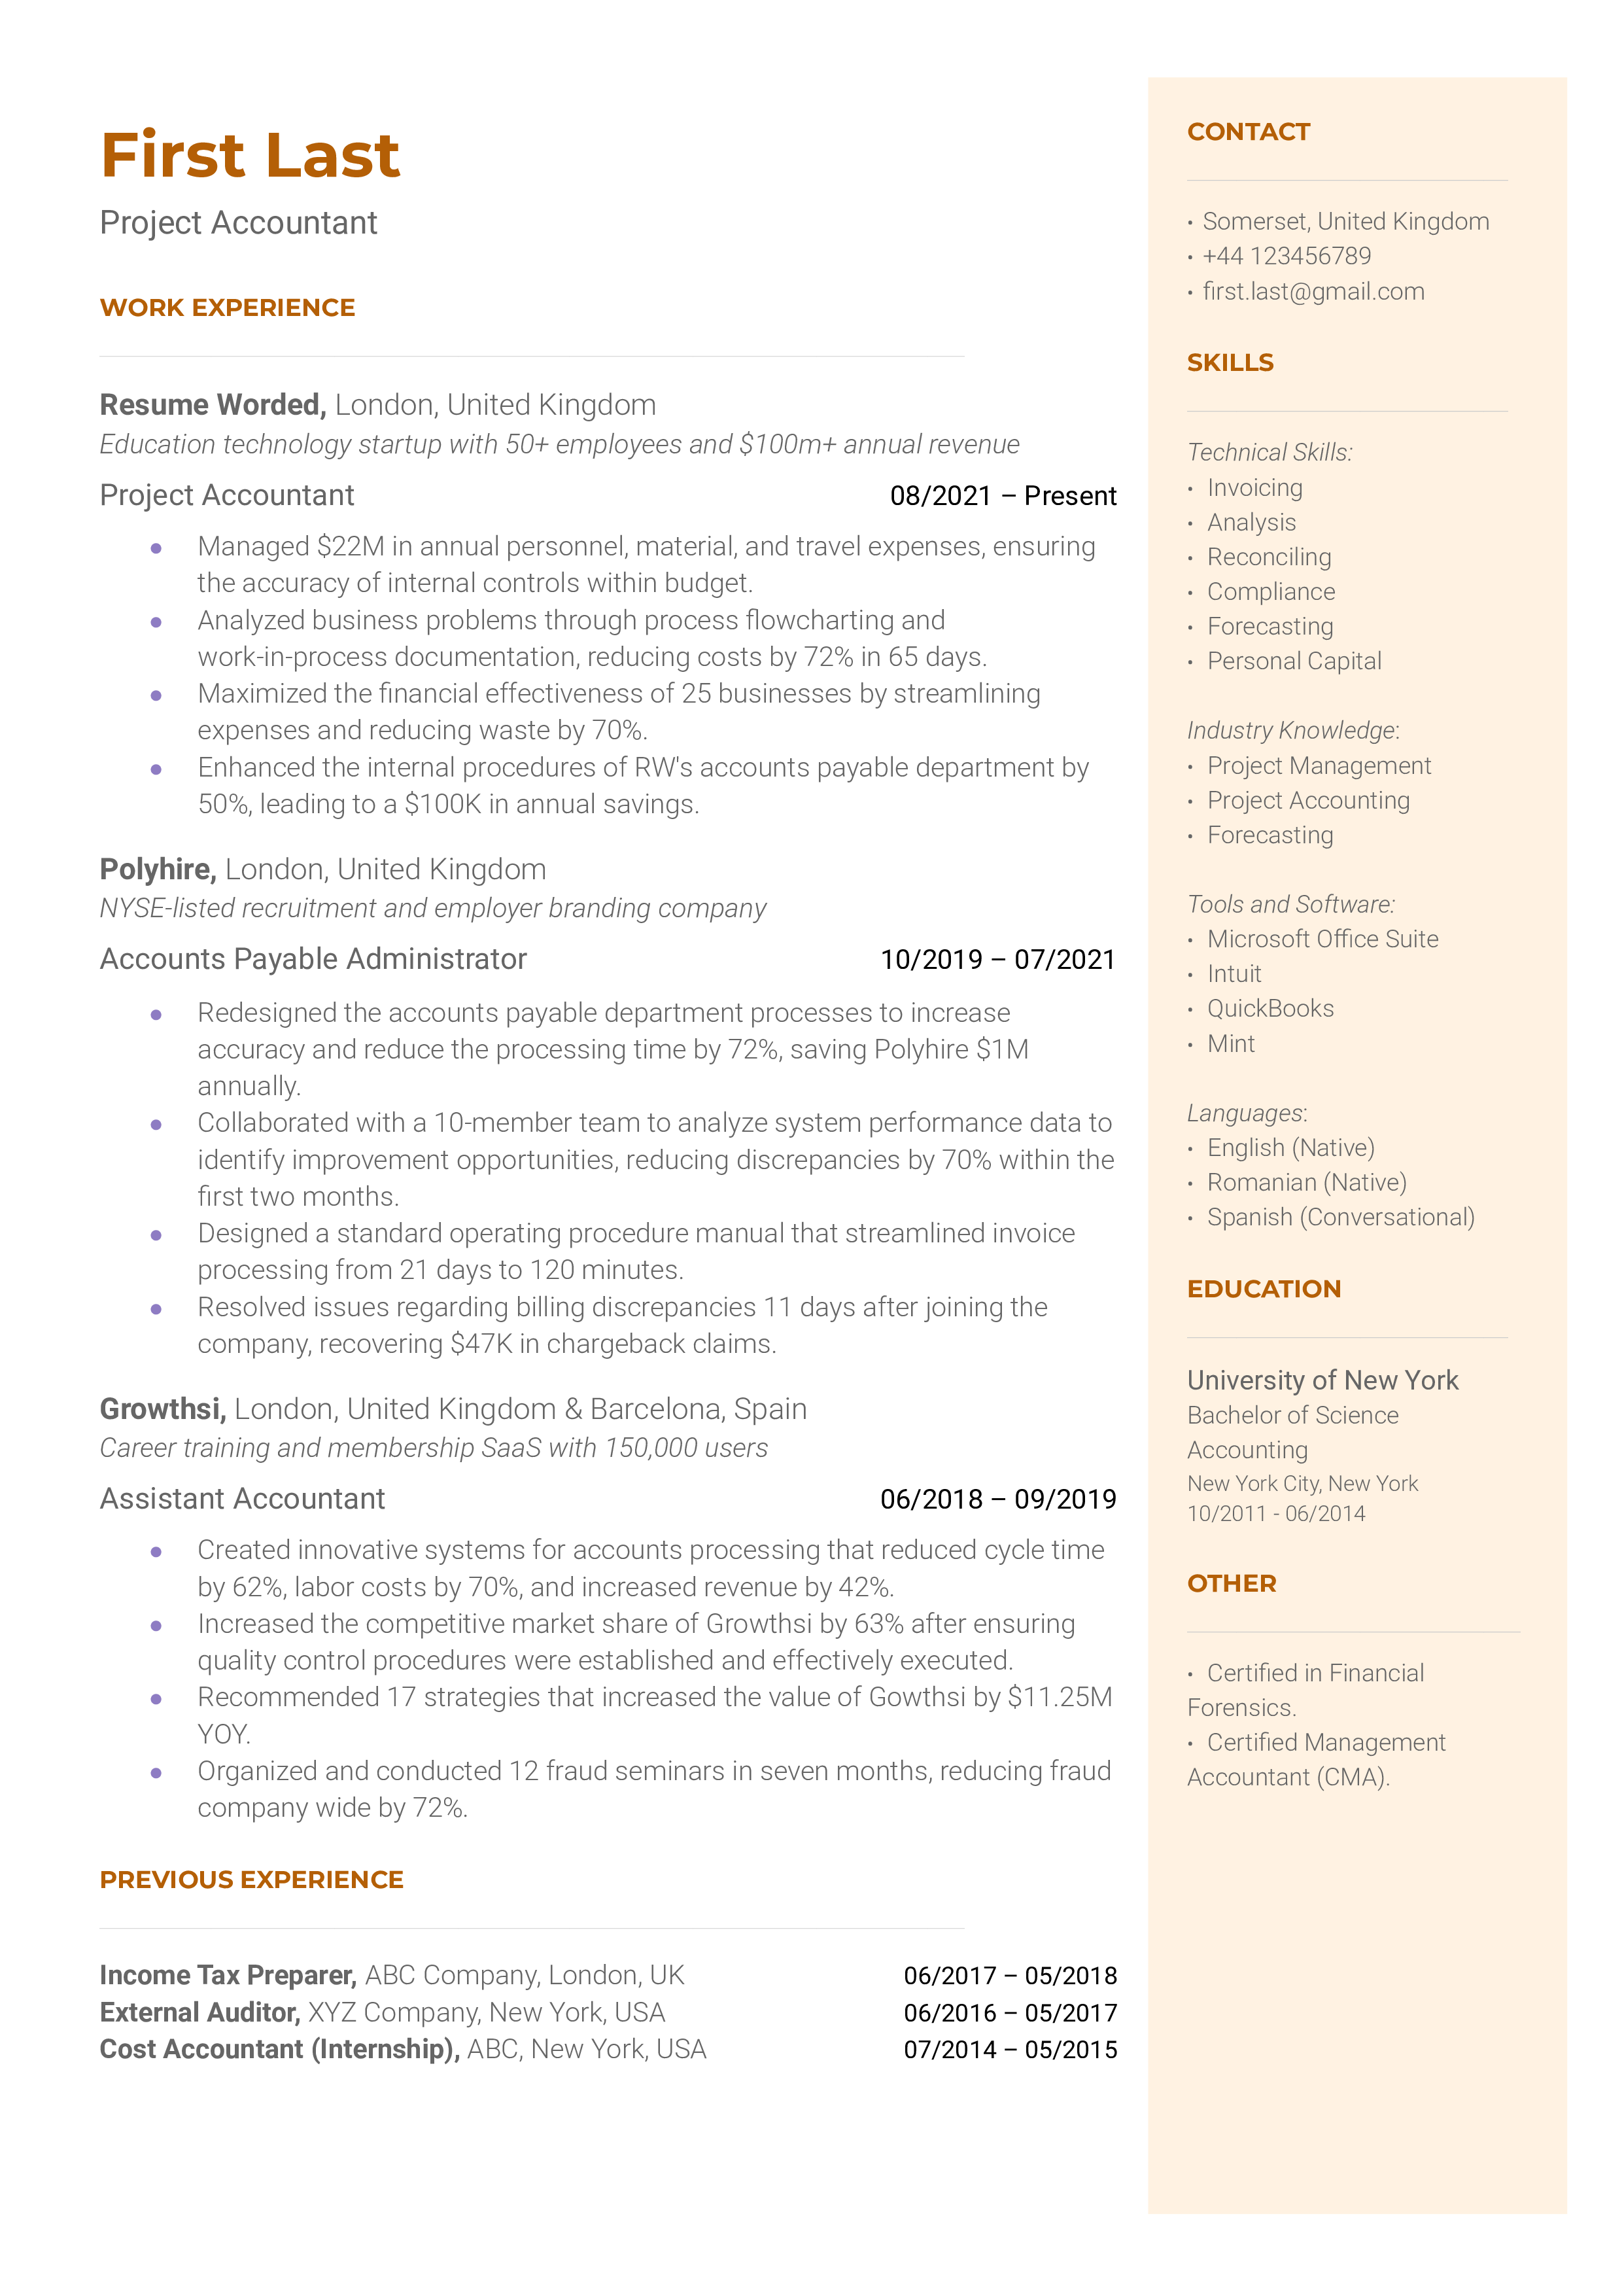 A project accountant resume sample that highlights the applicant’s accounting skills and project experience.